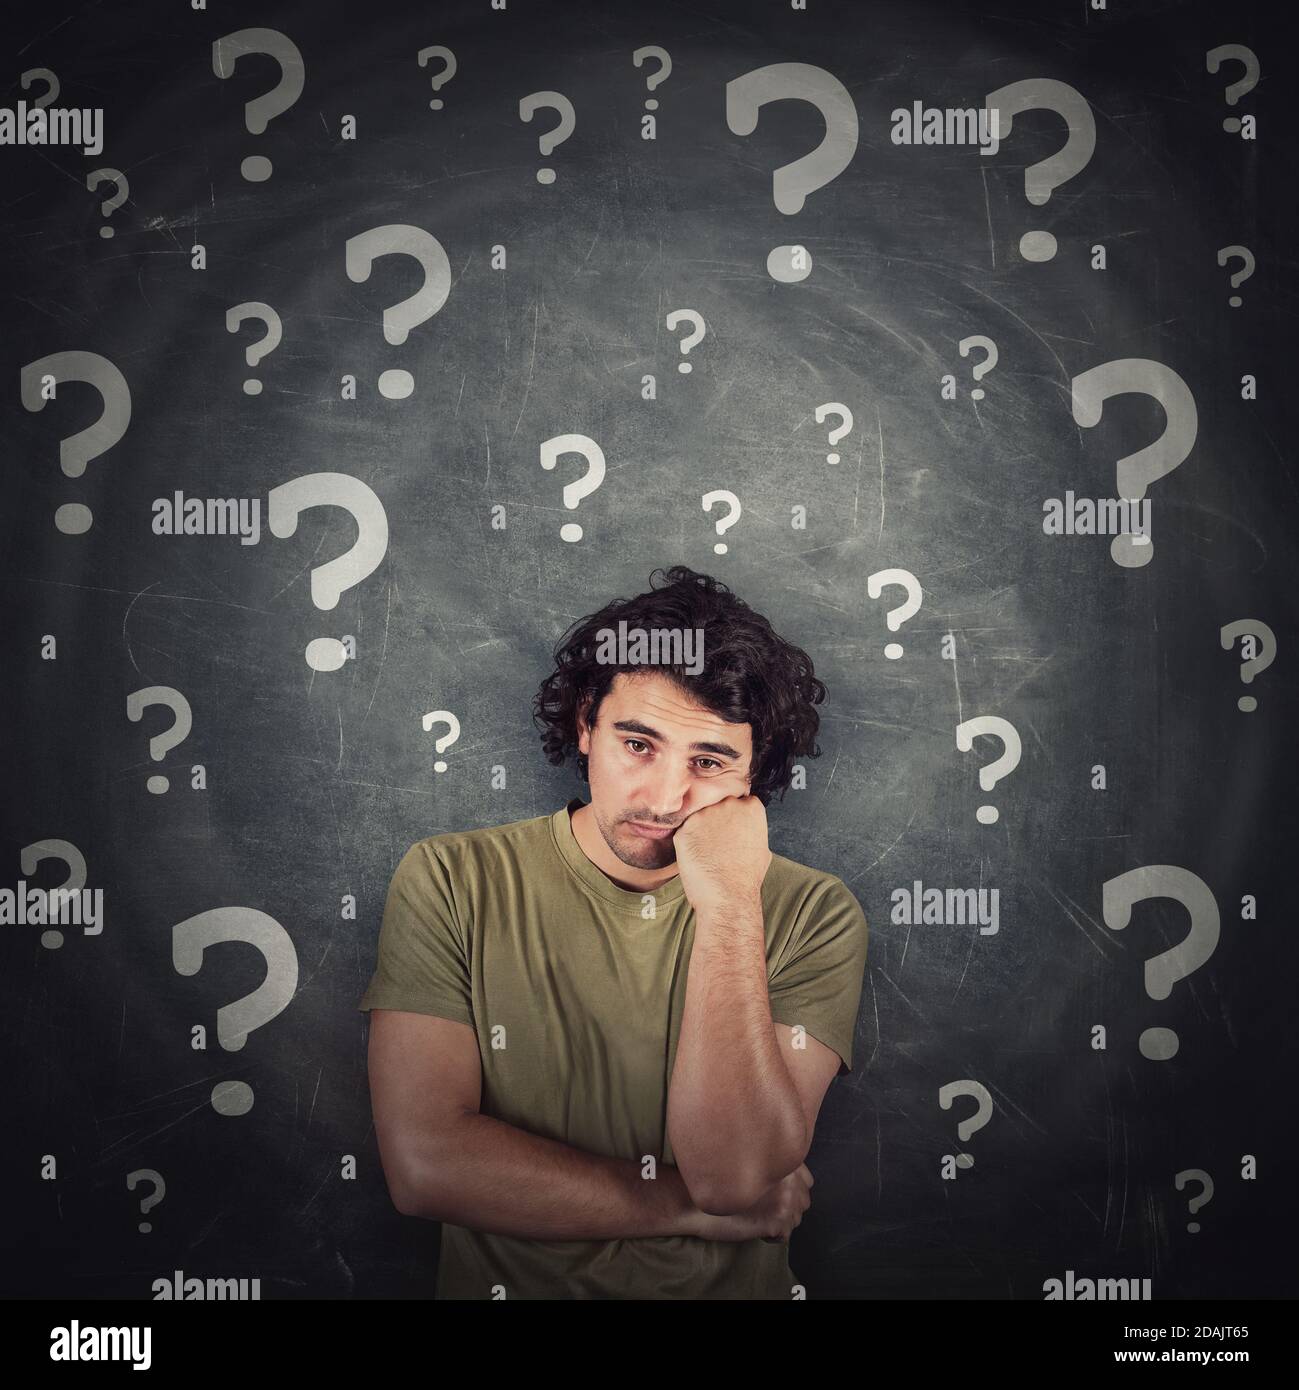 Melancholic young man, long curly hair style, keeps one fist under cheek, looks doubtful and unsure as multiple interrogation marks surrounds him. Puz Stock Photo